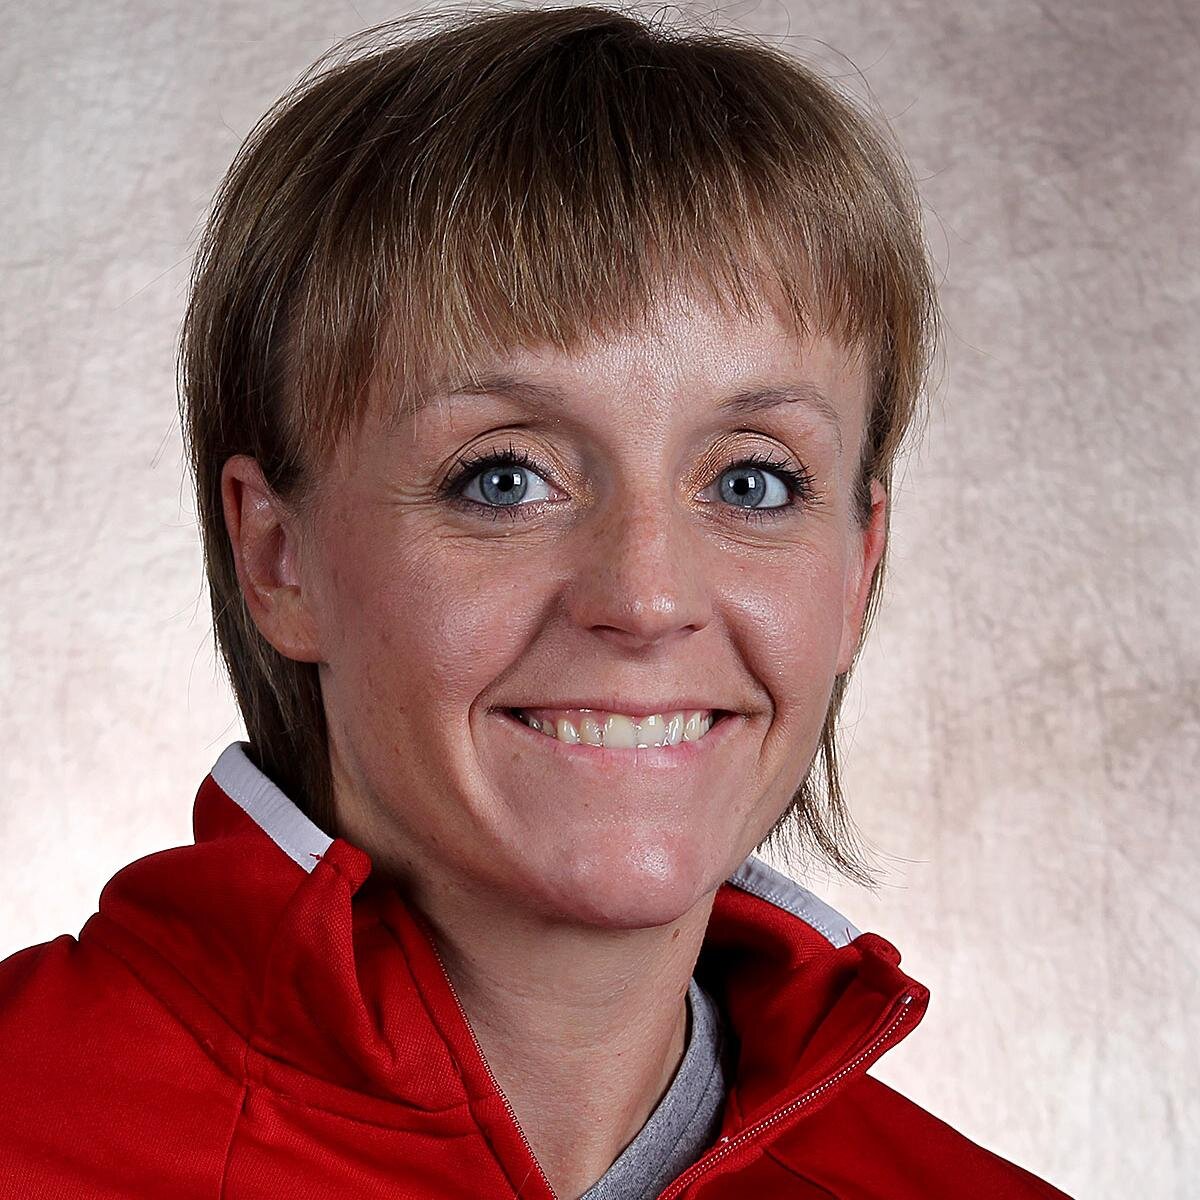 Head Coach of Women's Gymnastics for @Huskers in #Lincoln - Mother of 2 crazy boys